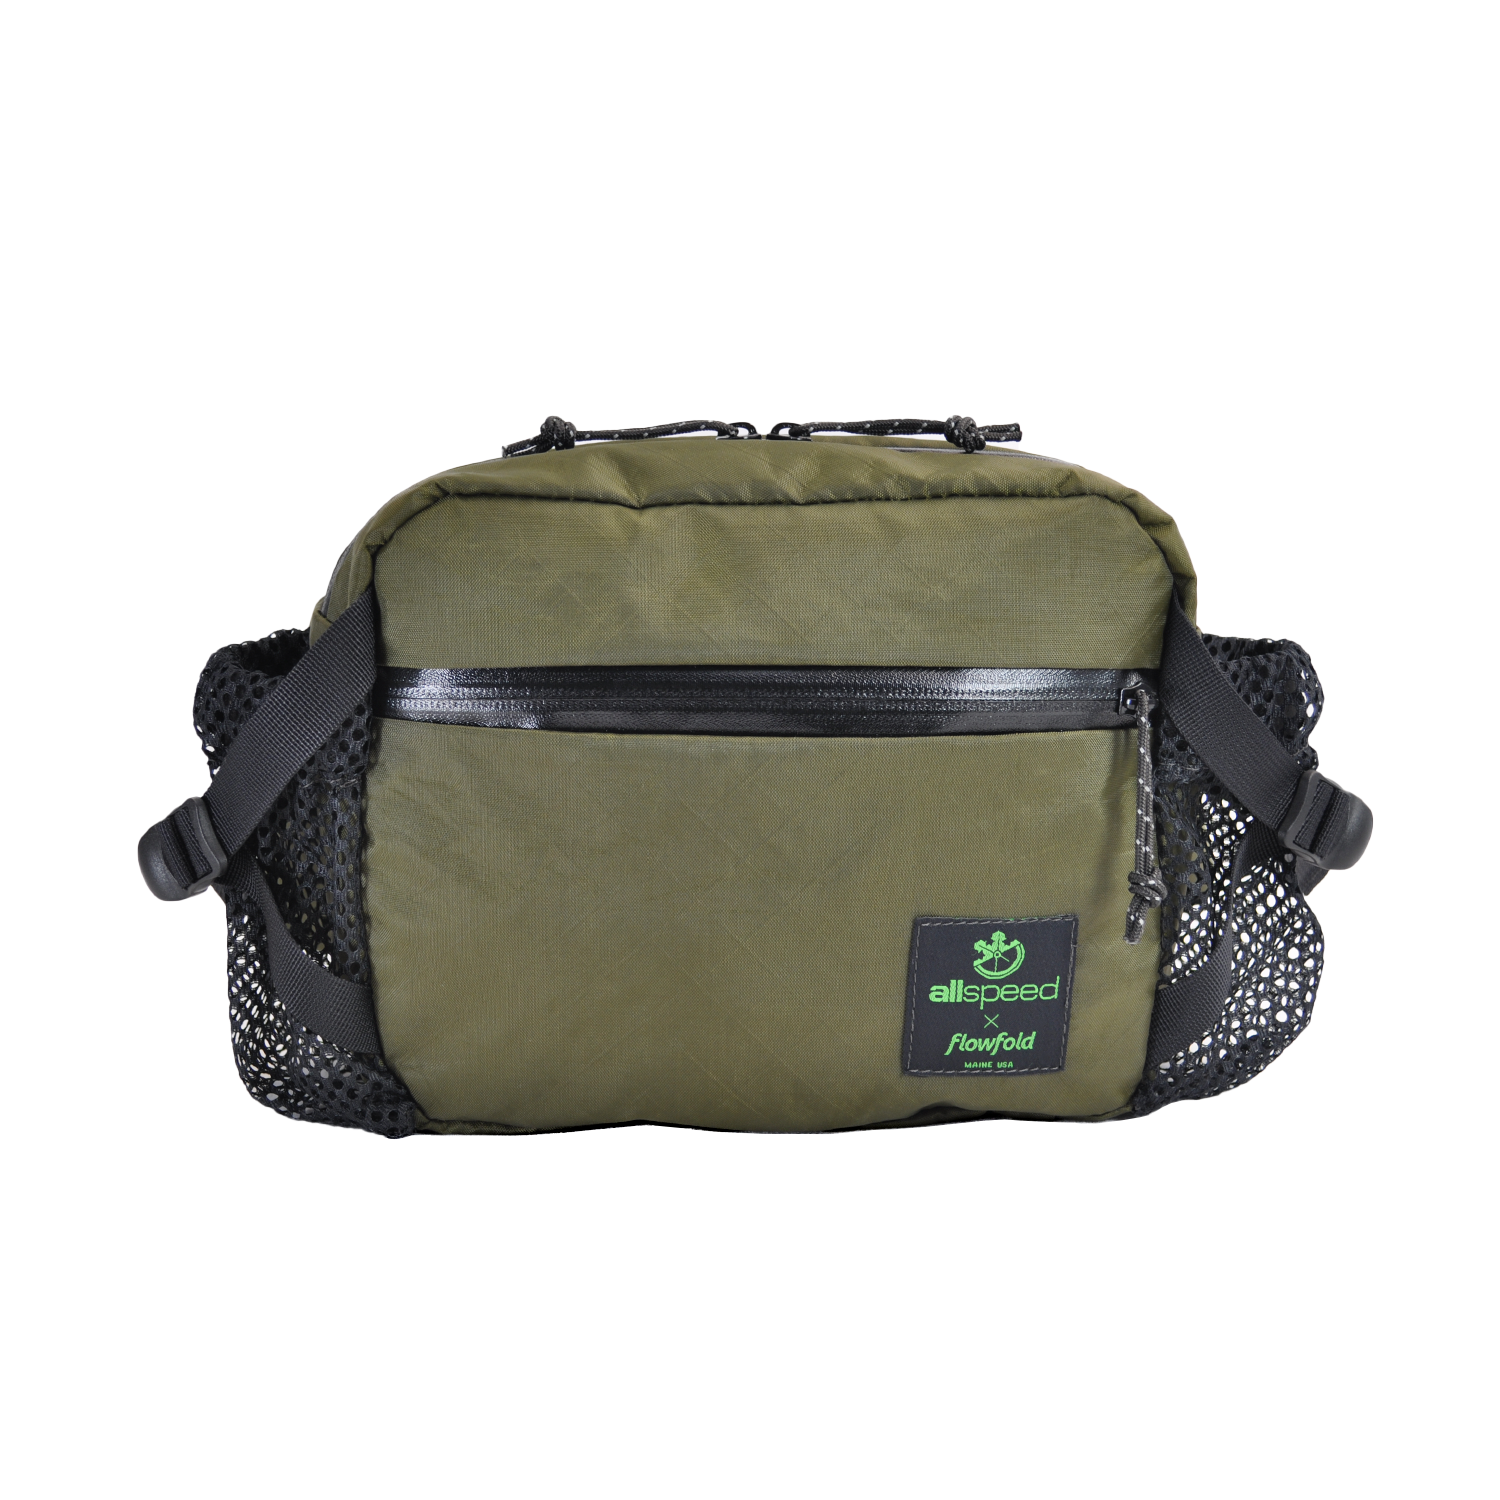 Allspeed x Flowfold Hip Pack - Recycled Olive